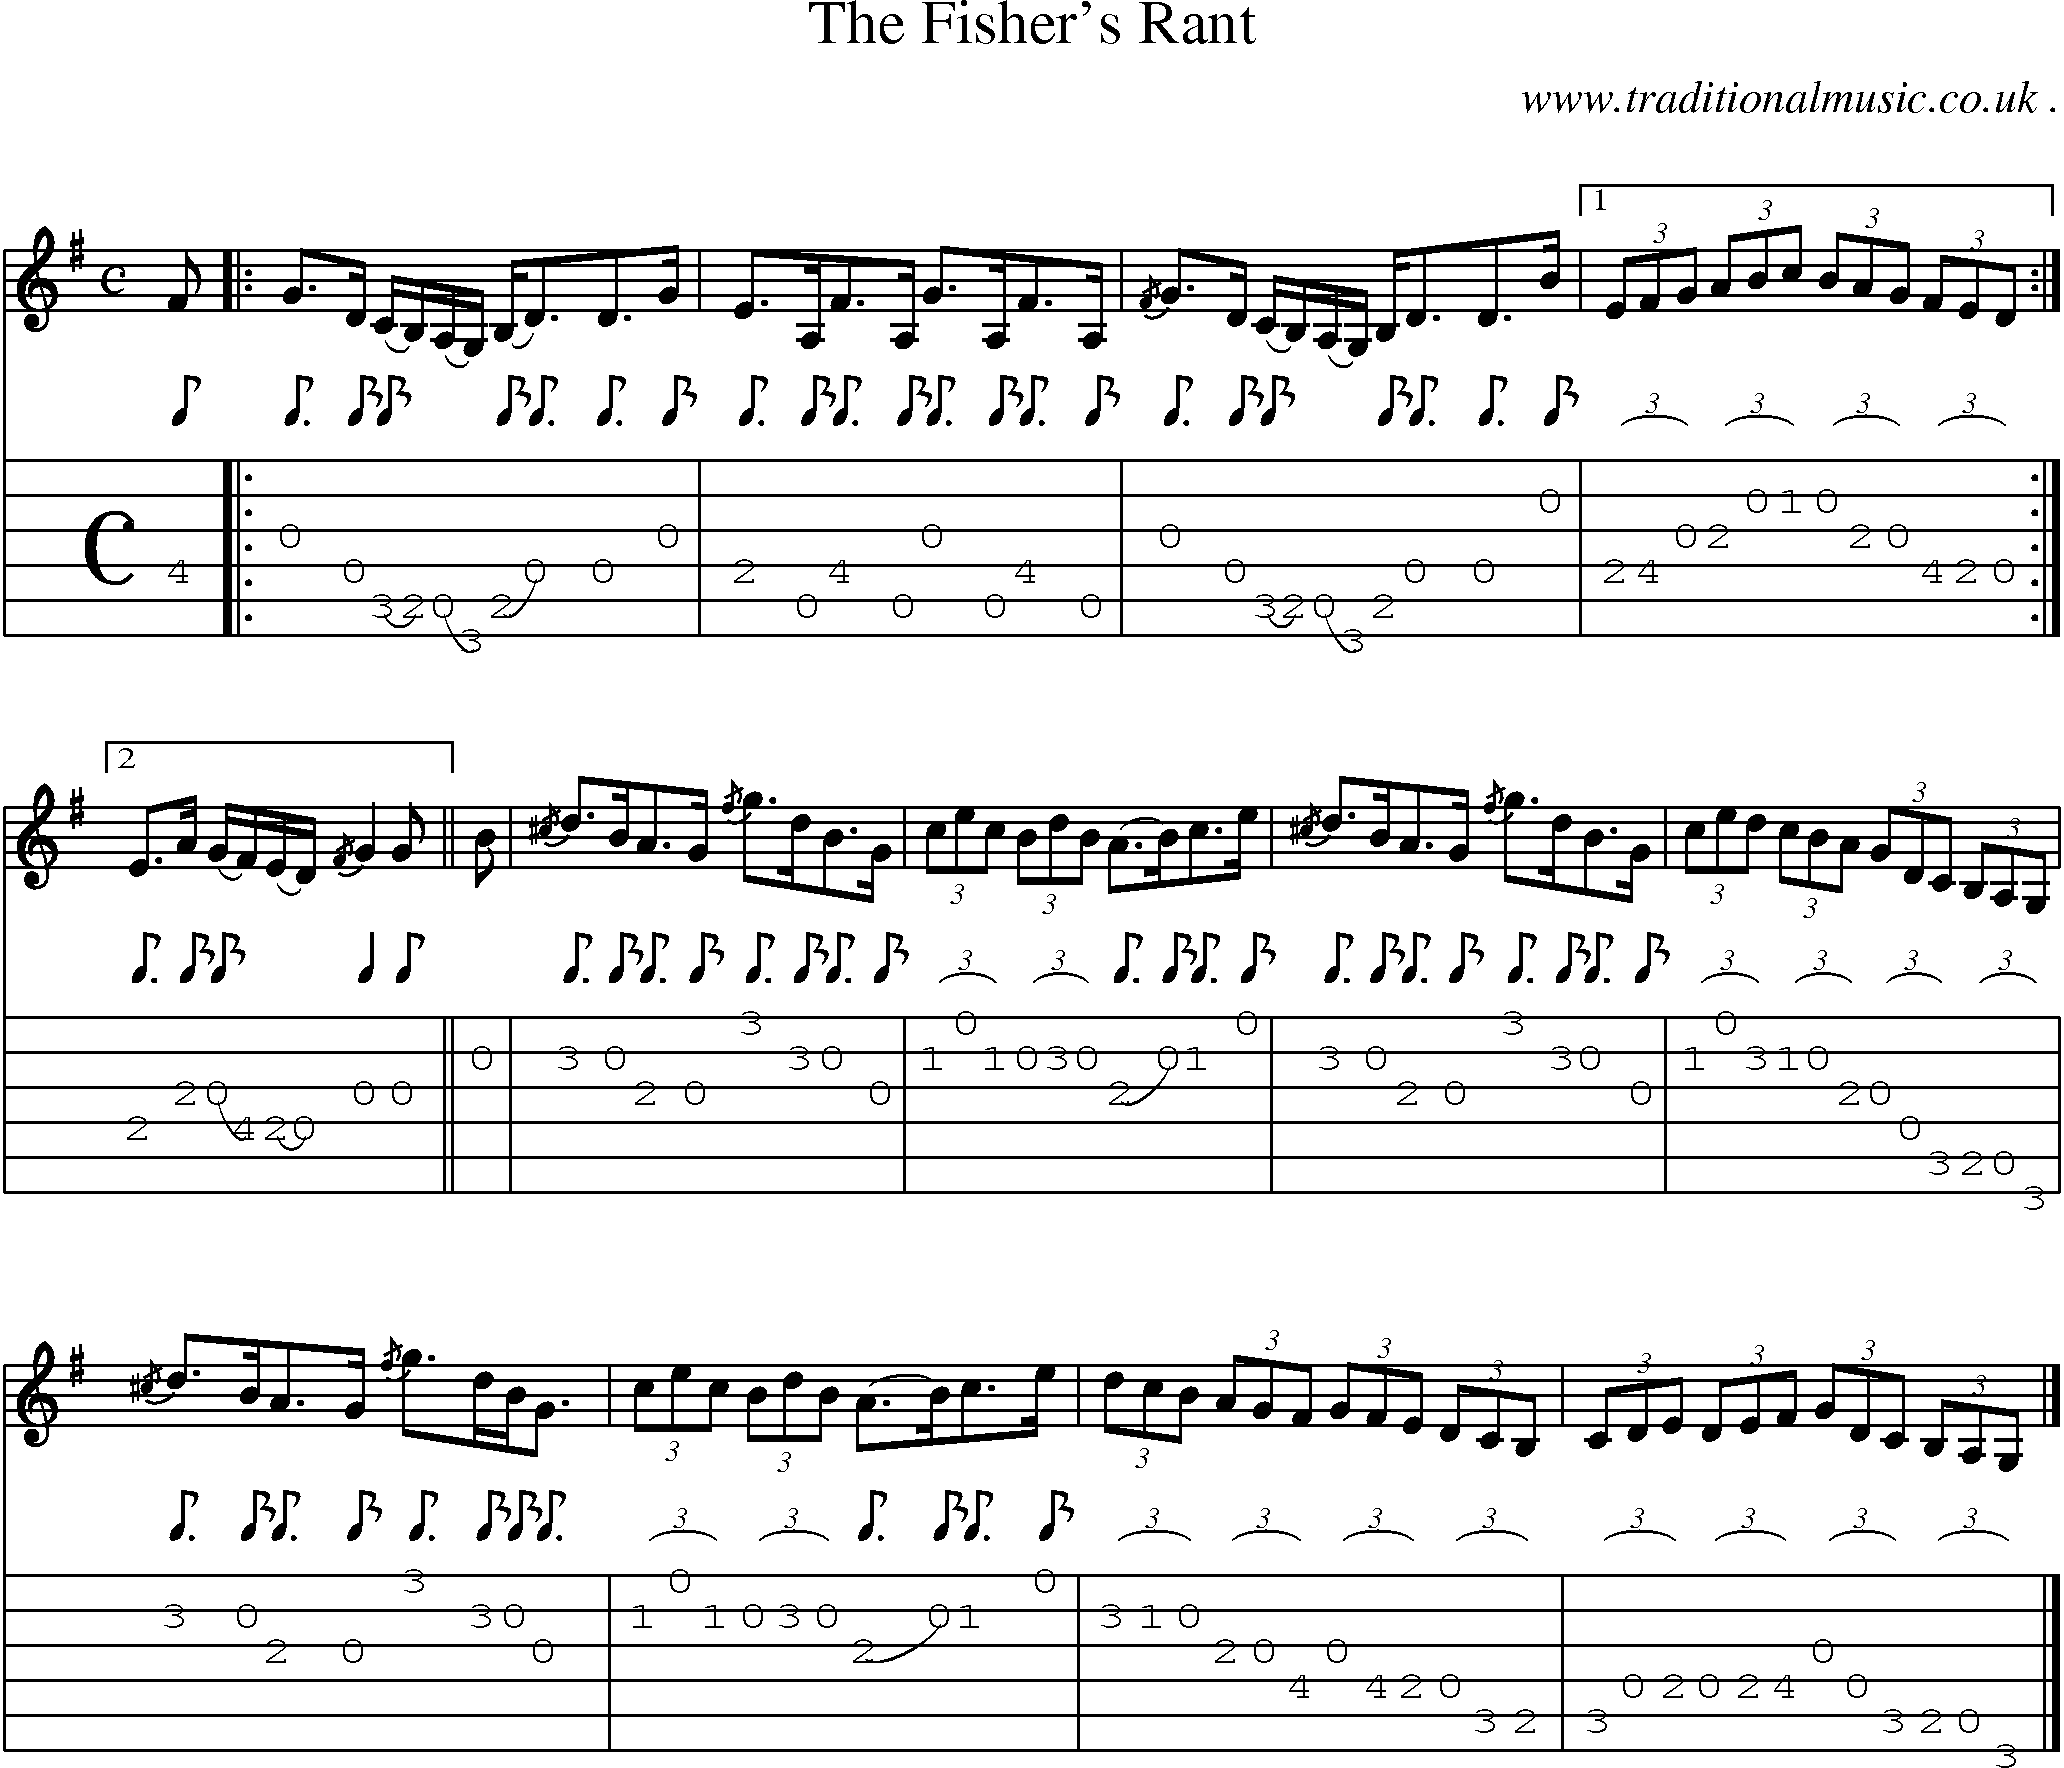 Sheet-music  score, Chords and Guitar Tabs for The Fishers Rant